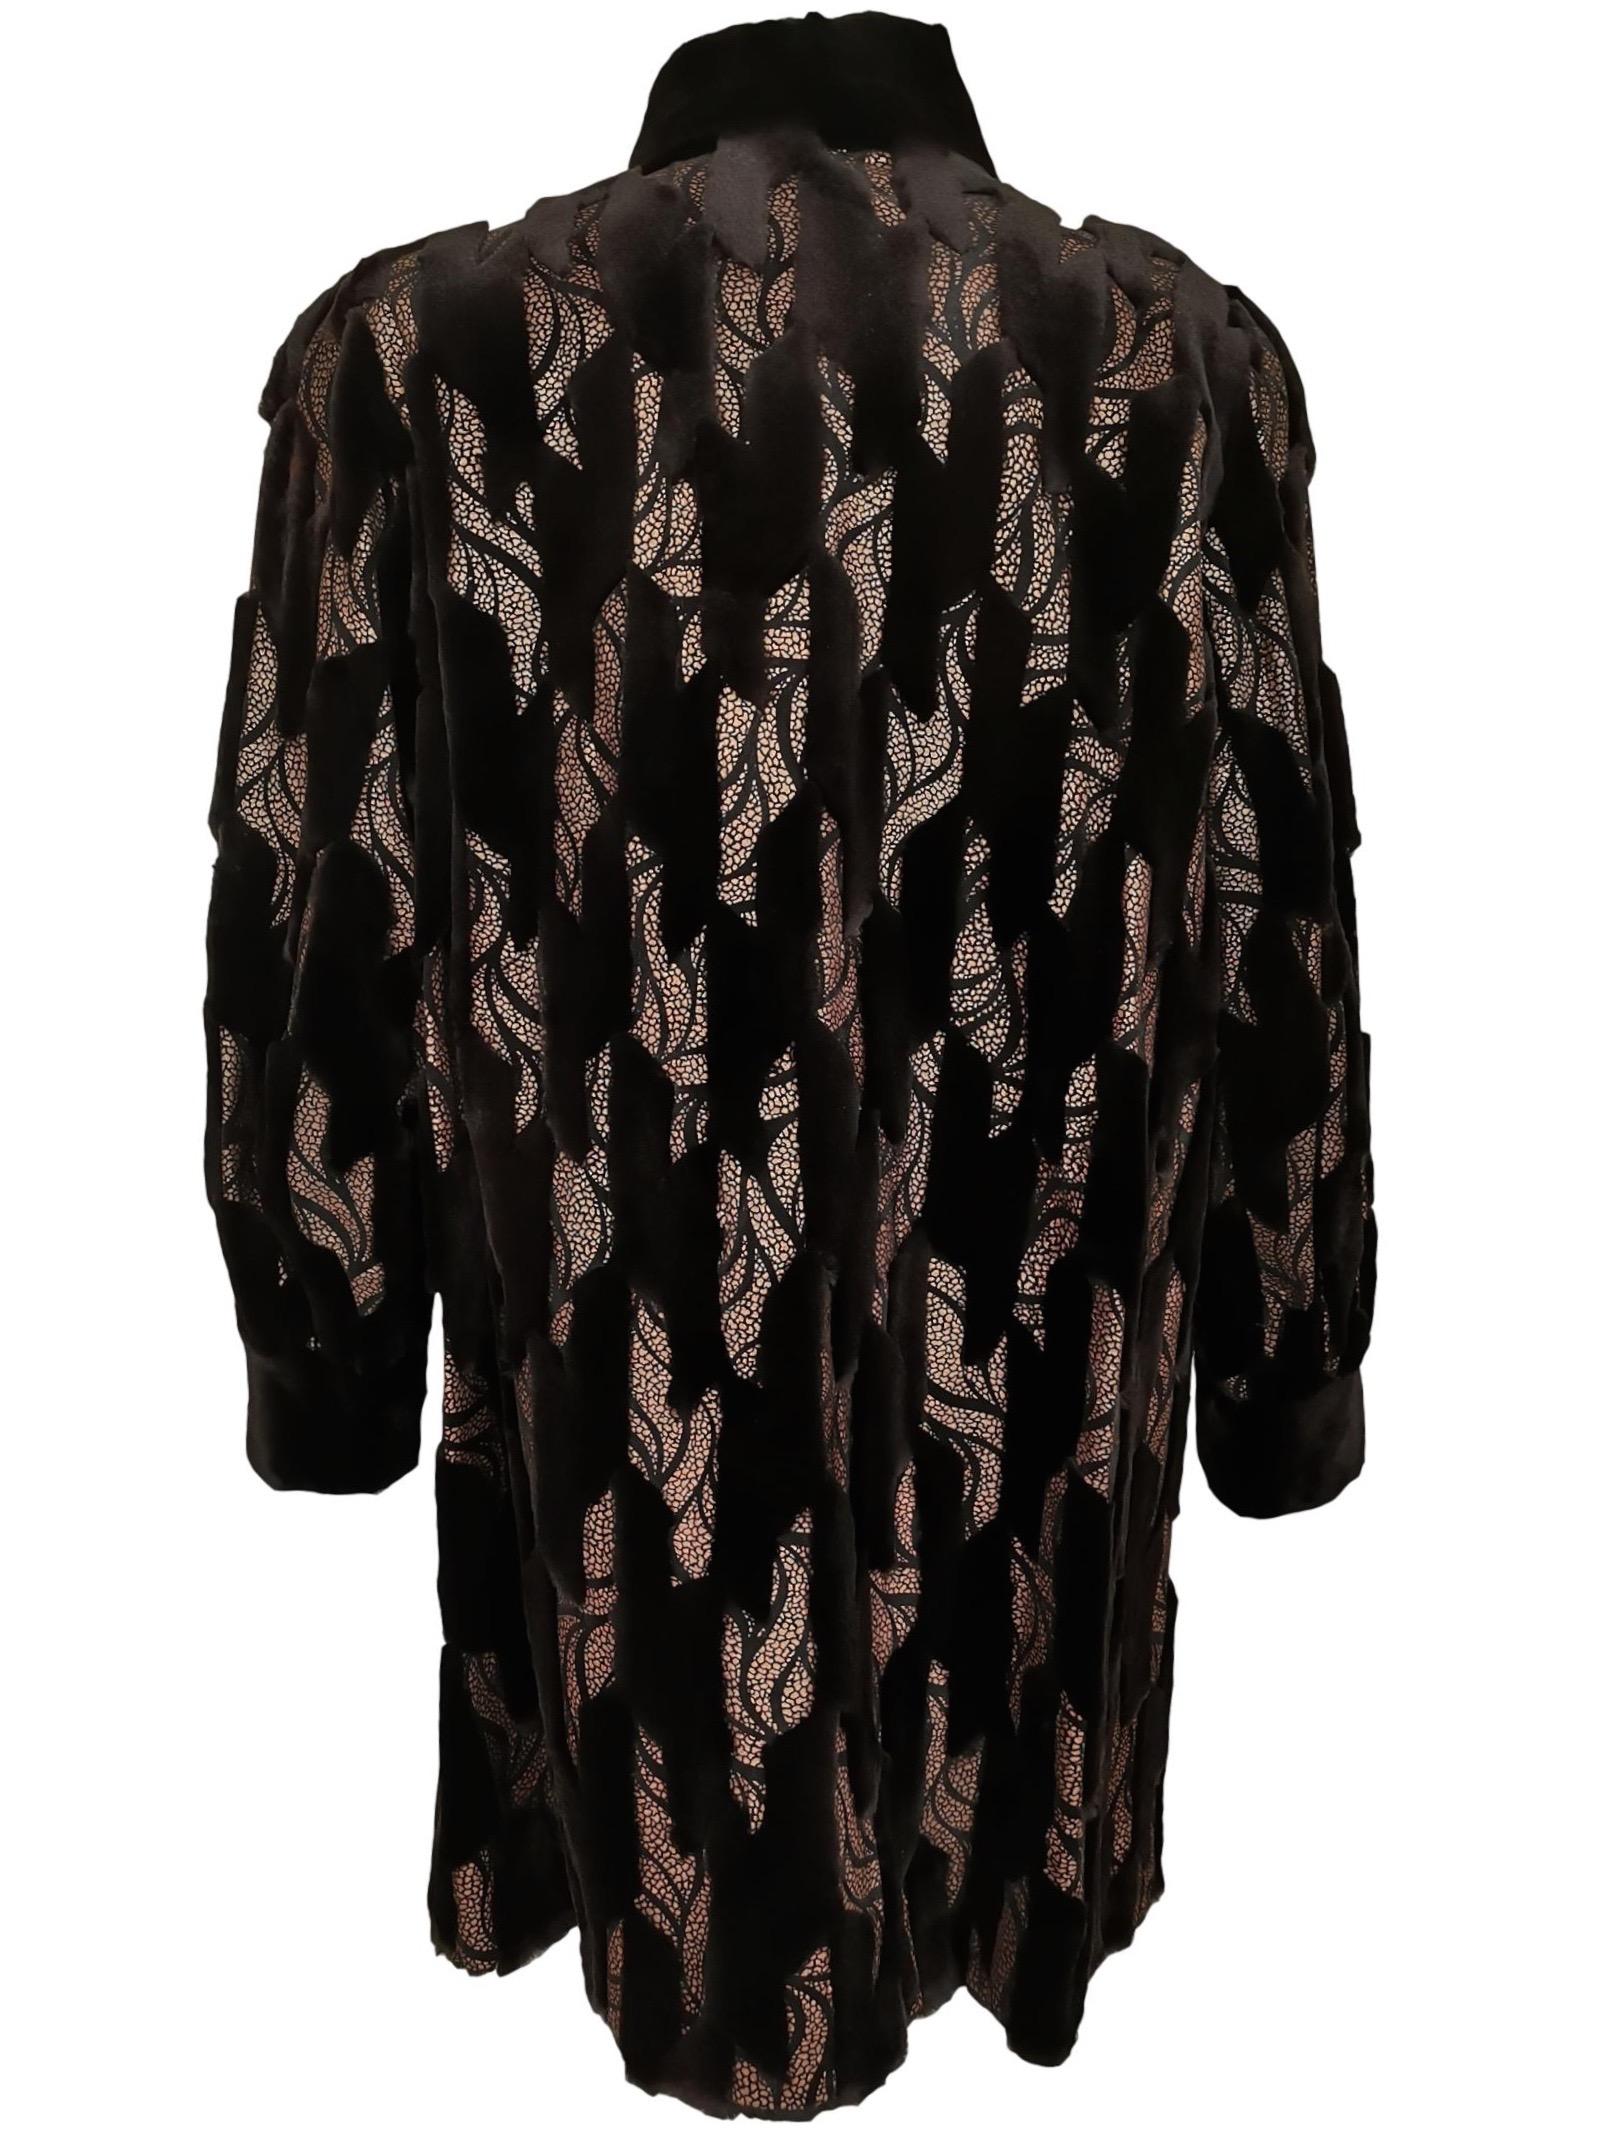 Guy Laroche
Patterned Mink Jacket
Soft and Subtle Texture
No Size Label
40 Inch Bust